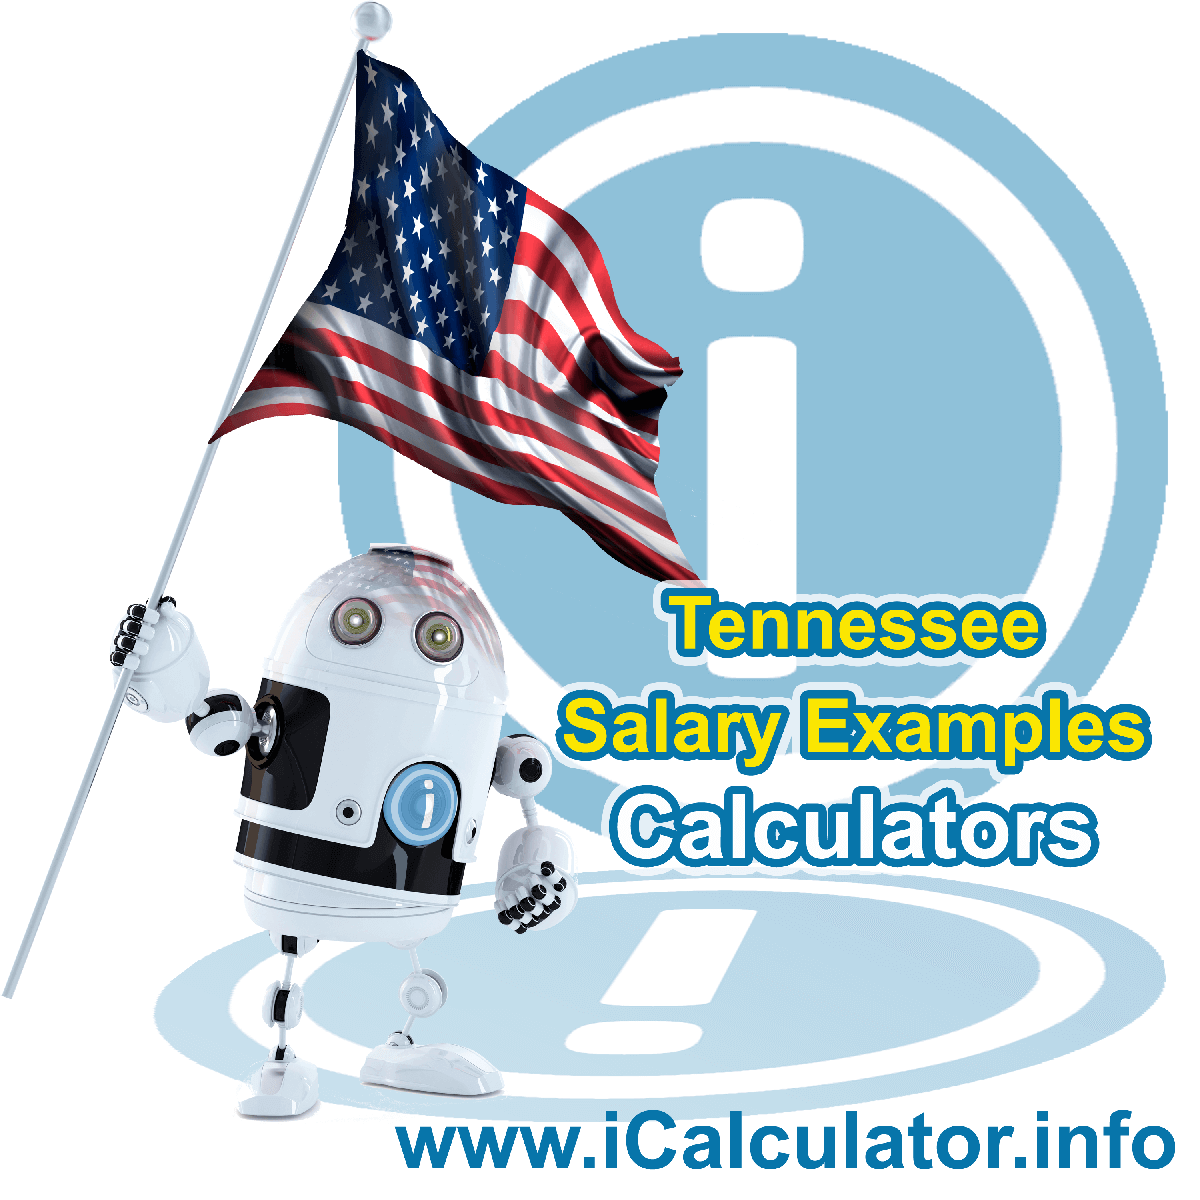 Tennessee Salary Example for $120,000.00 in 2022 | iCalculator™ | $120,000.00 salary example for employee and employer paying Tennessee State tincome taxes. Detailed salary after tax calculation including Tennessee State Tax, Federal State Tax, Medicare Deductions, Social Security, Capital Gains and other income tax and salary deductions complete with supporting Tennessee state tax tables 